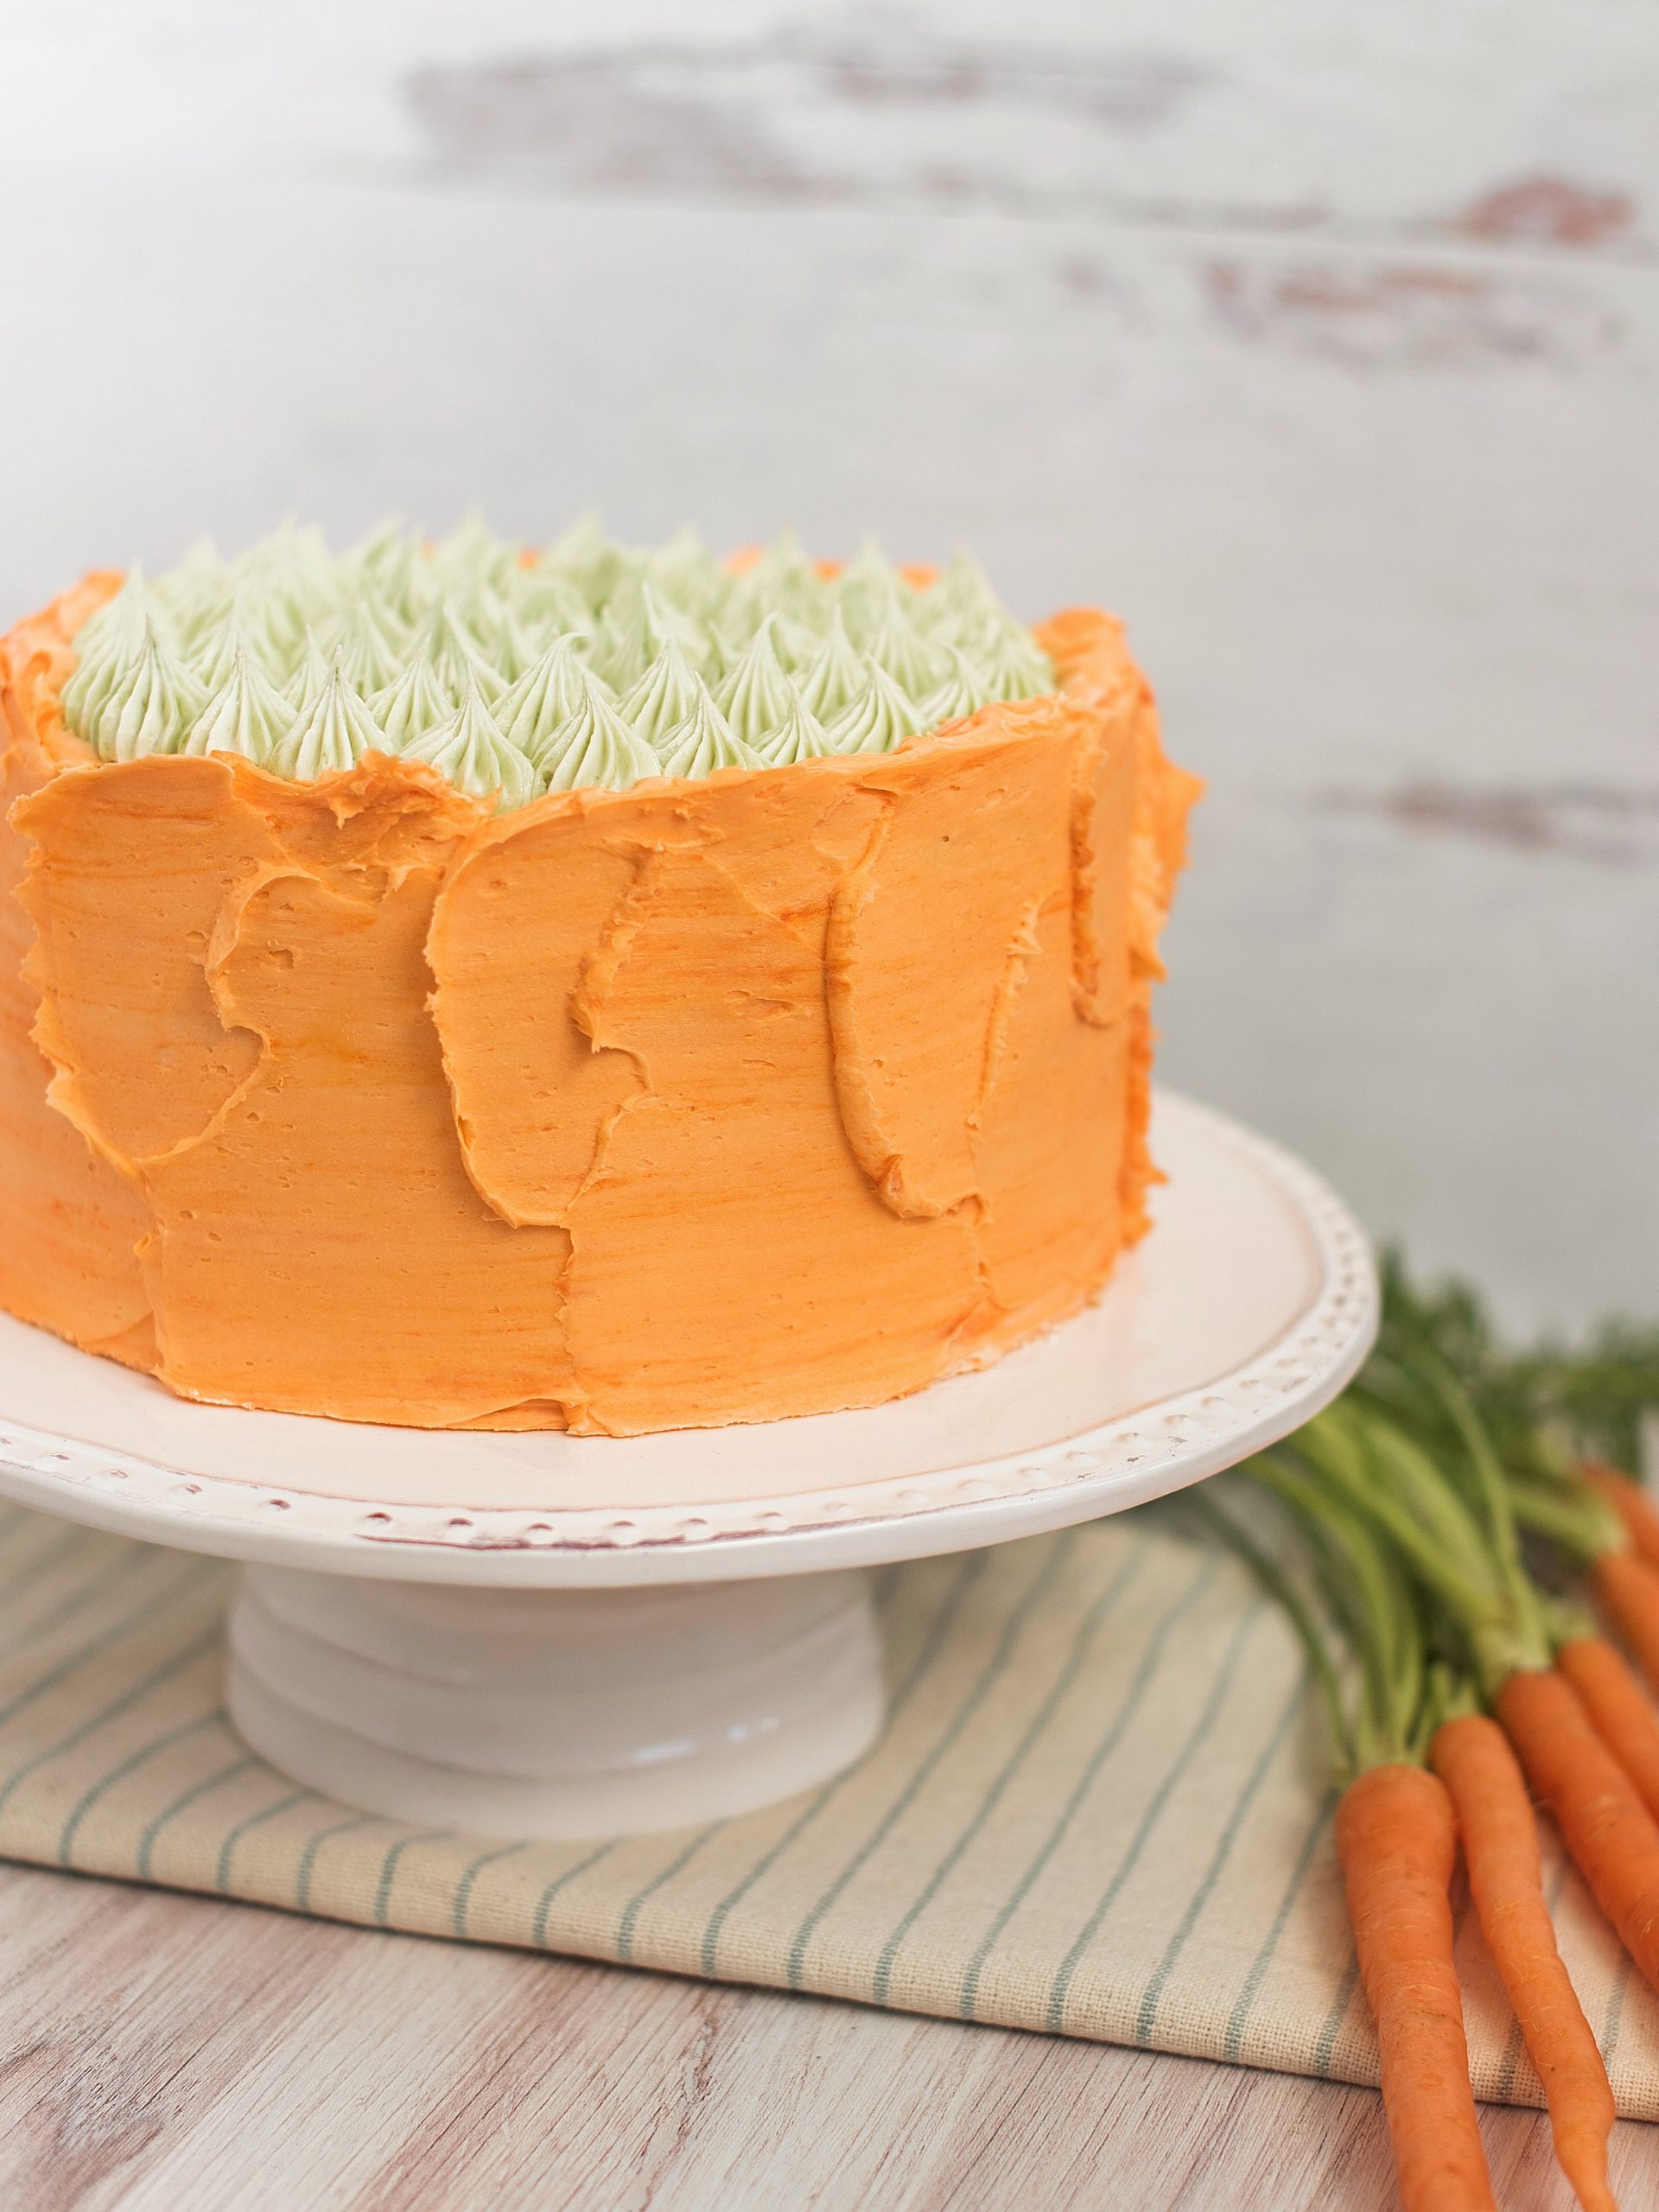 Carrot Apricot Cake - carrot ginger cake layers with white chocolate buttercream, apricot filling and a pretzel crunch #cakebycourtney #carrotcake #whitechocolatebuttercream #cake #eastercake #carrotcakeforeaster #easterdessert